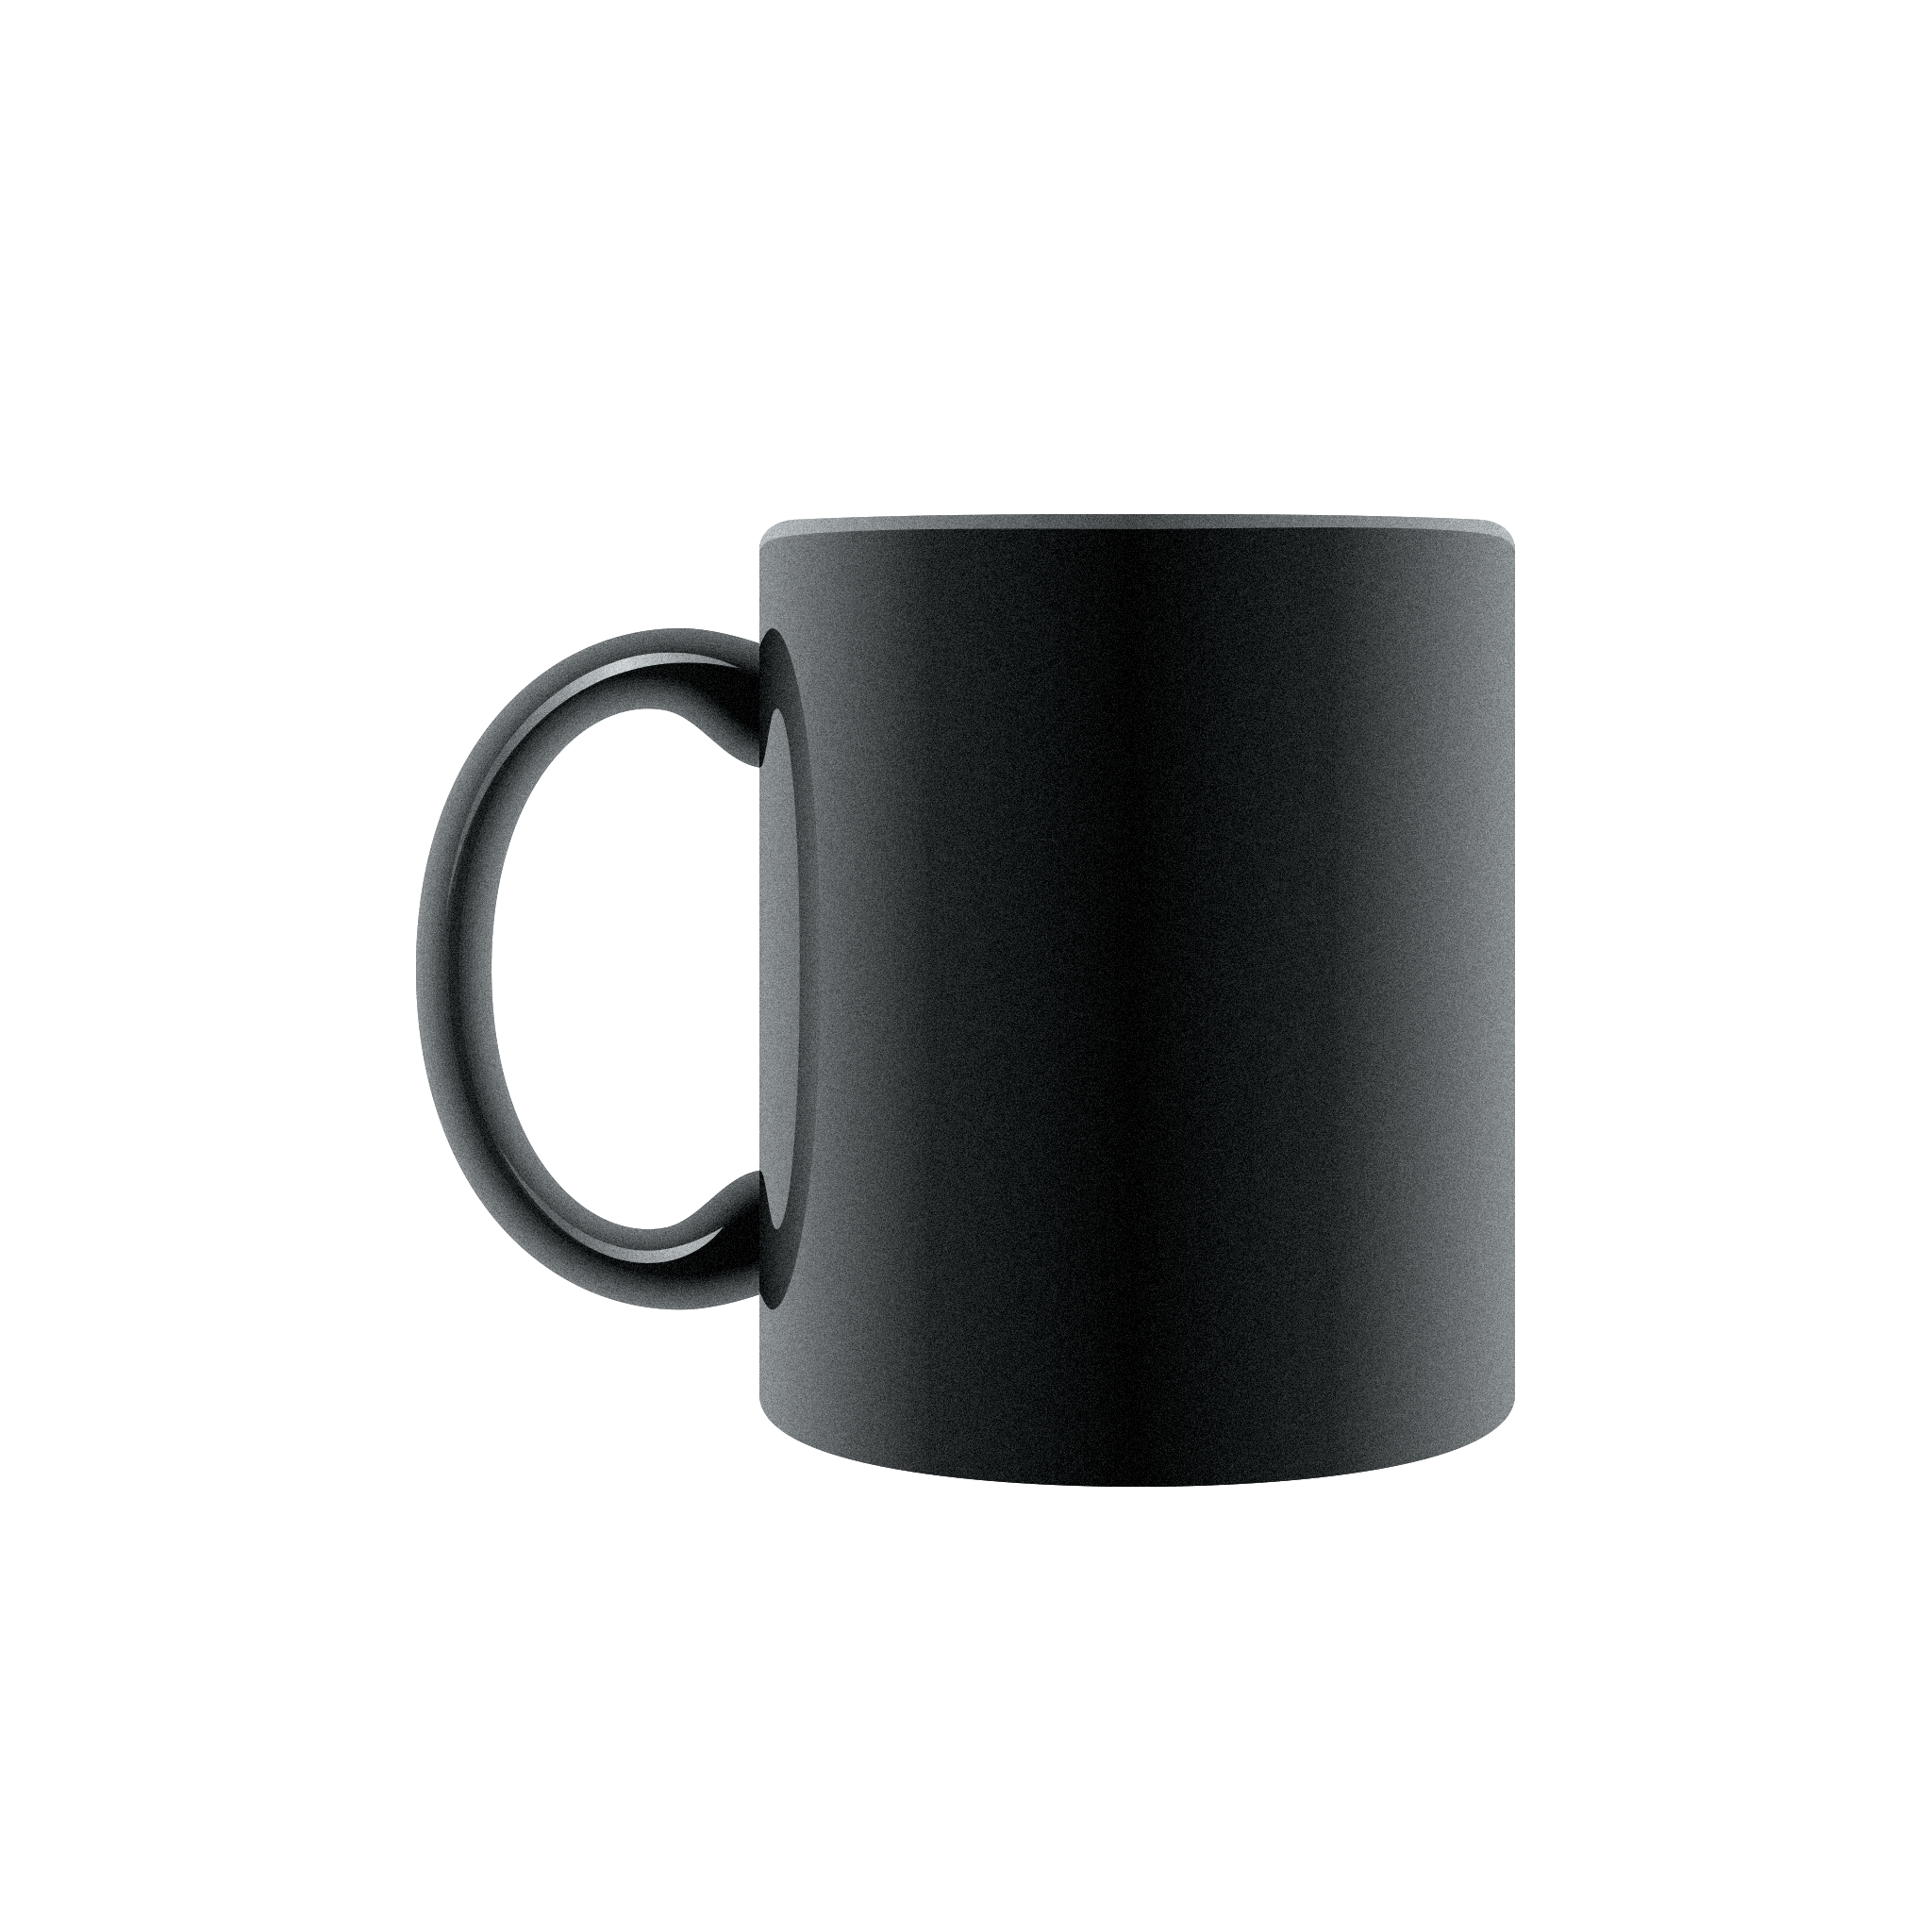 Empty Cup Download Free Image PNG Image